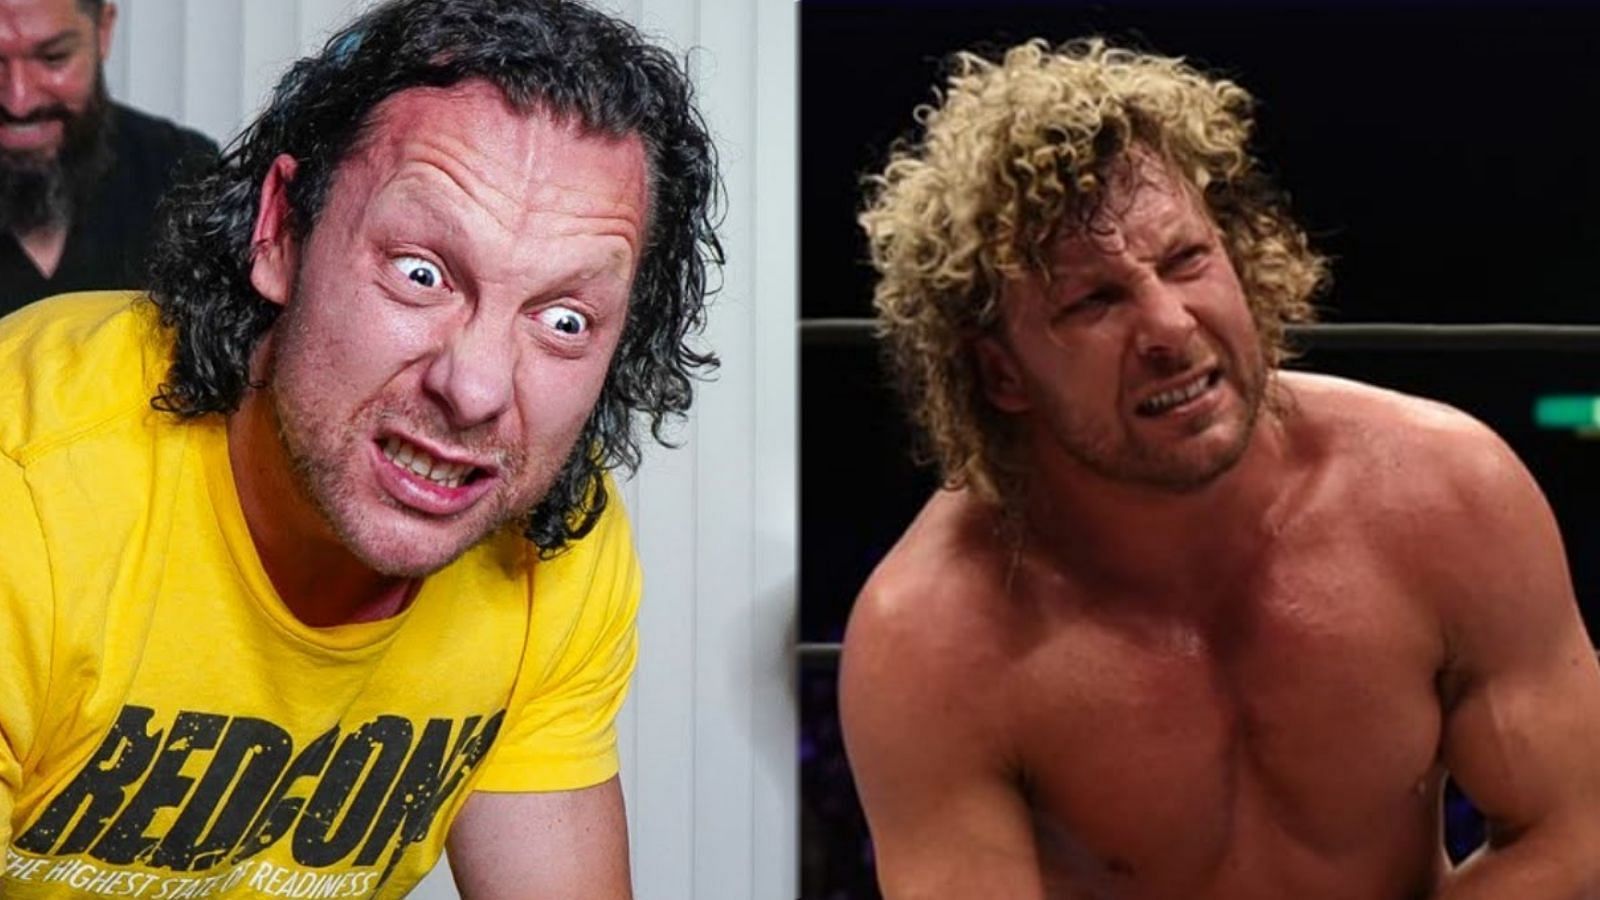 Kenny Omega Seen with Unmistakable Bite Mark From AEW All Out Fight -  SEScoops Wrestling